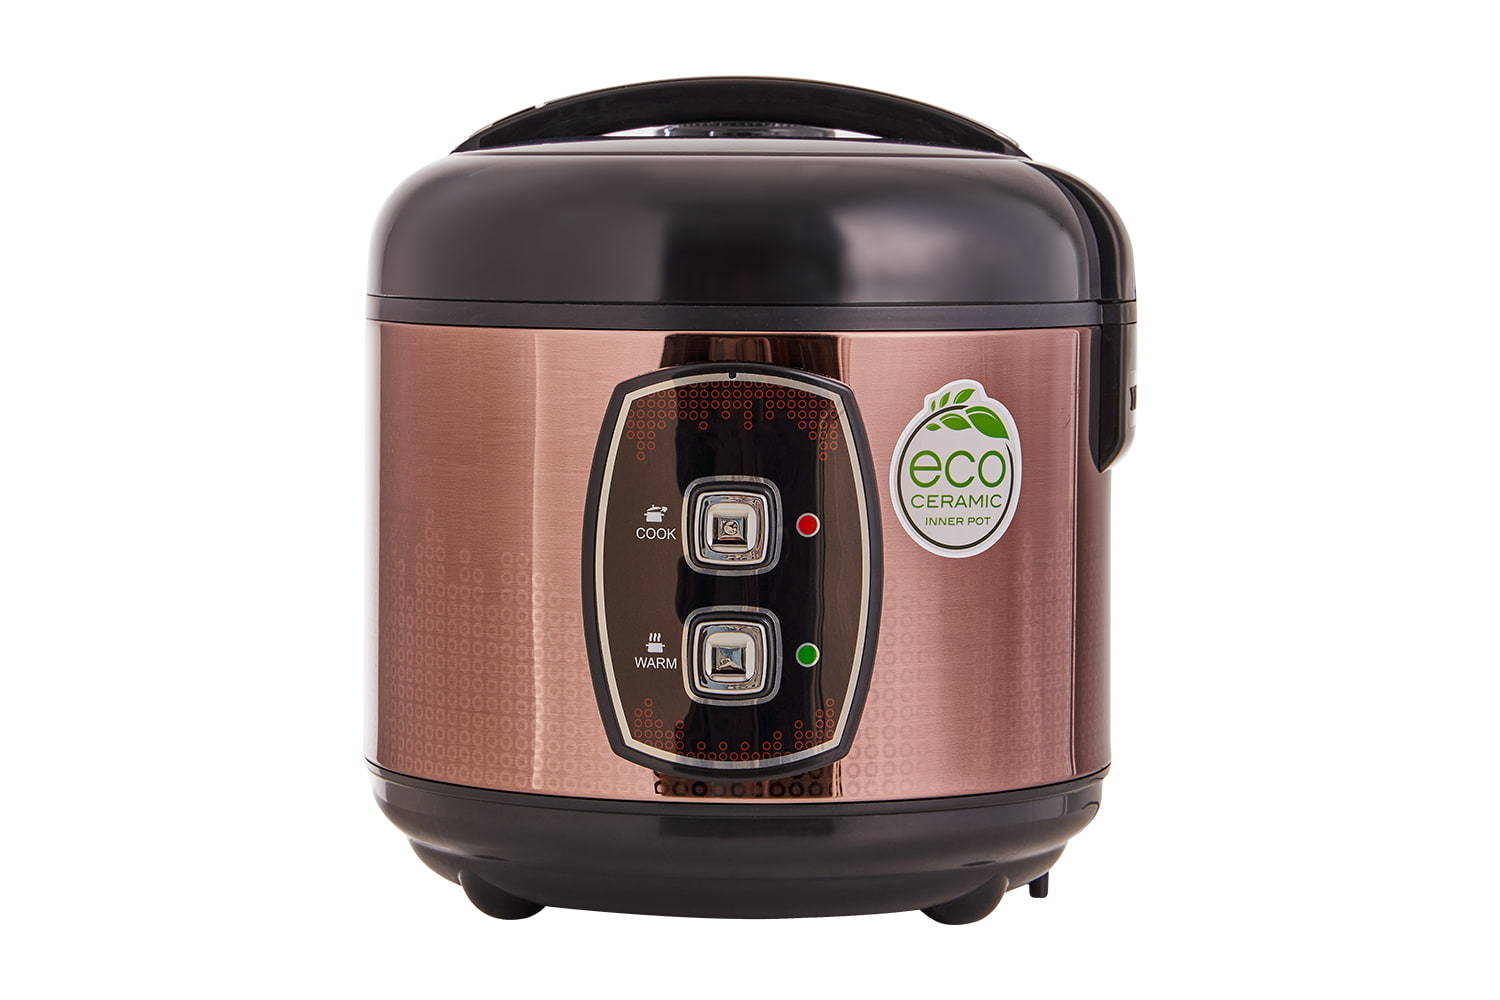 Rice Cooker YYF-50YJ08, One click start, simple operation